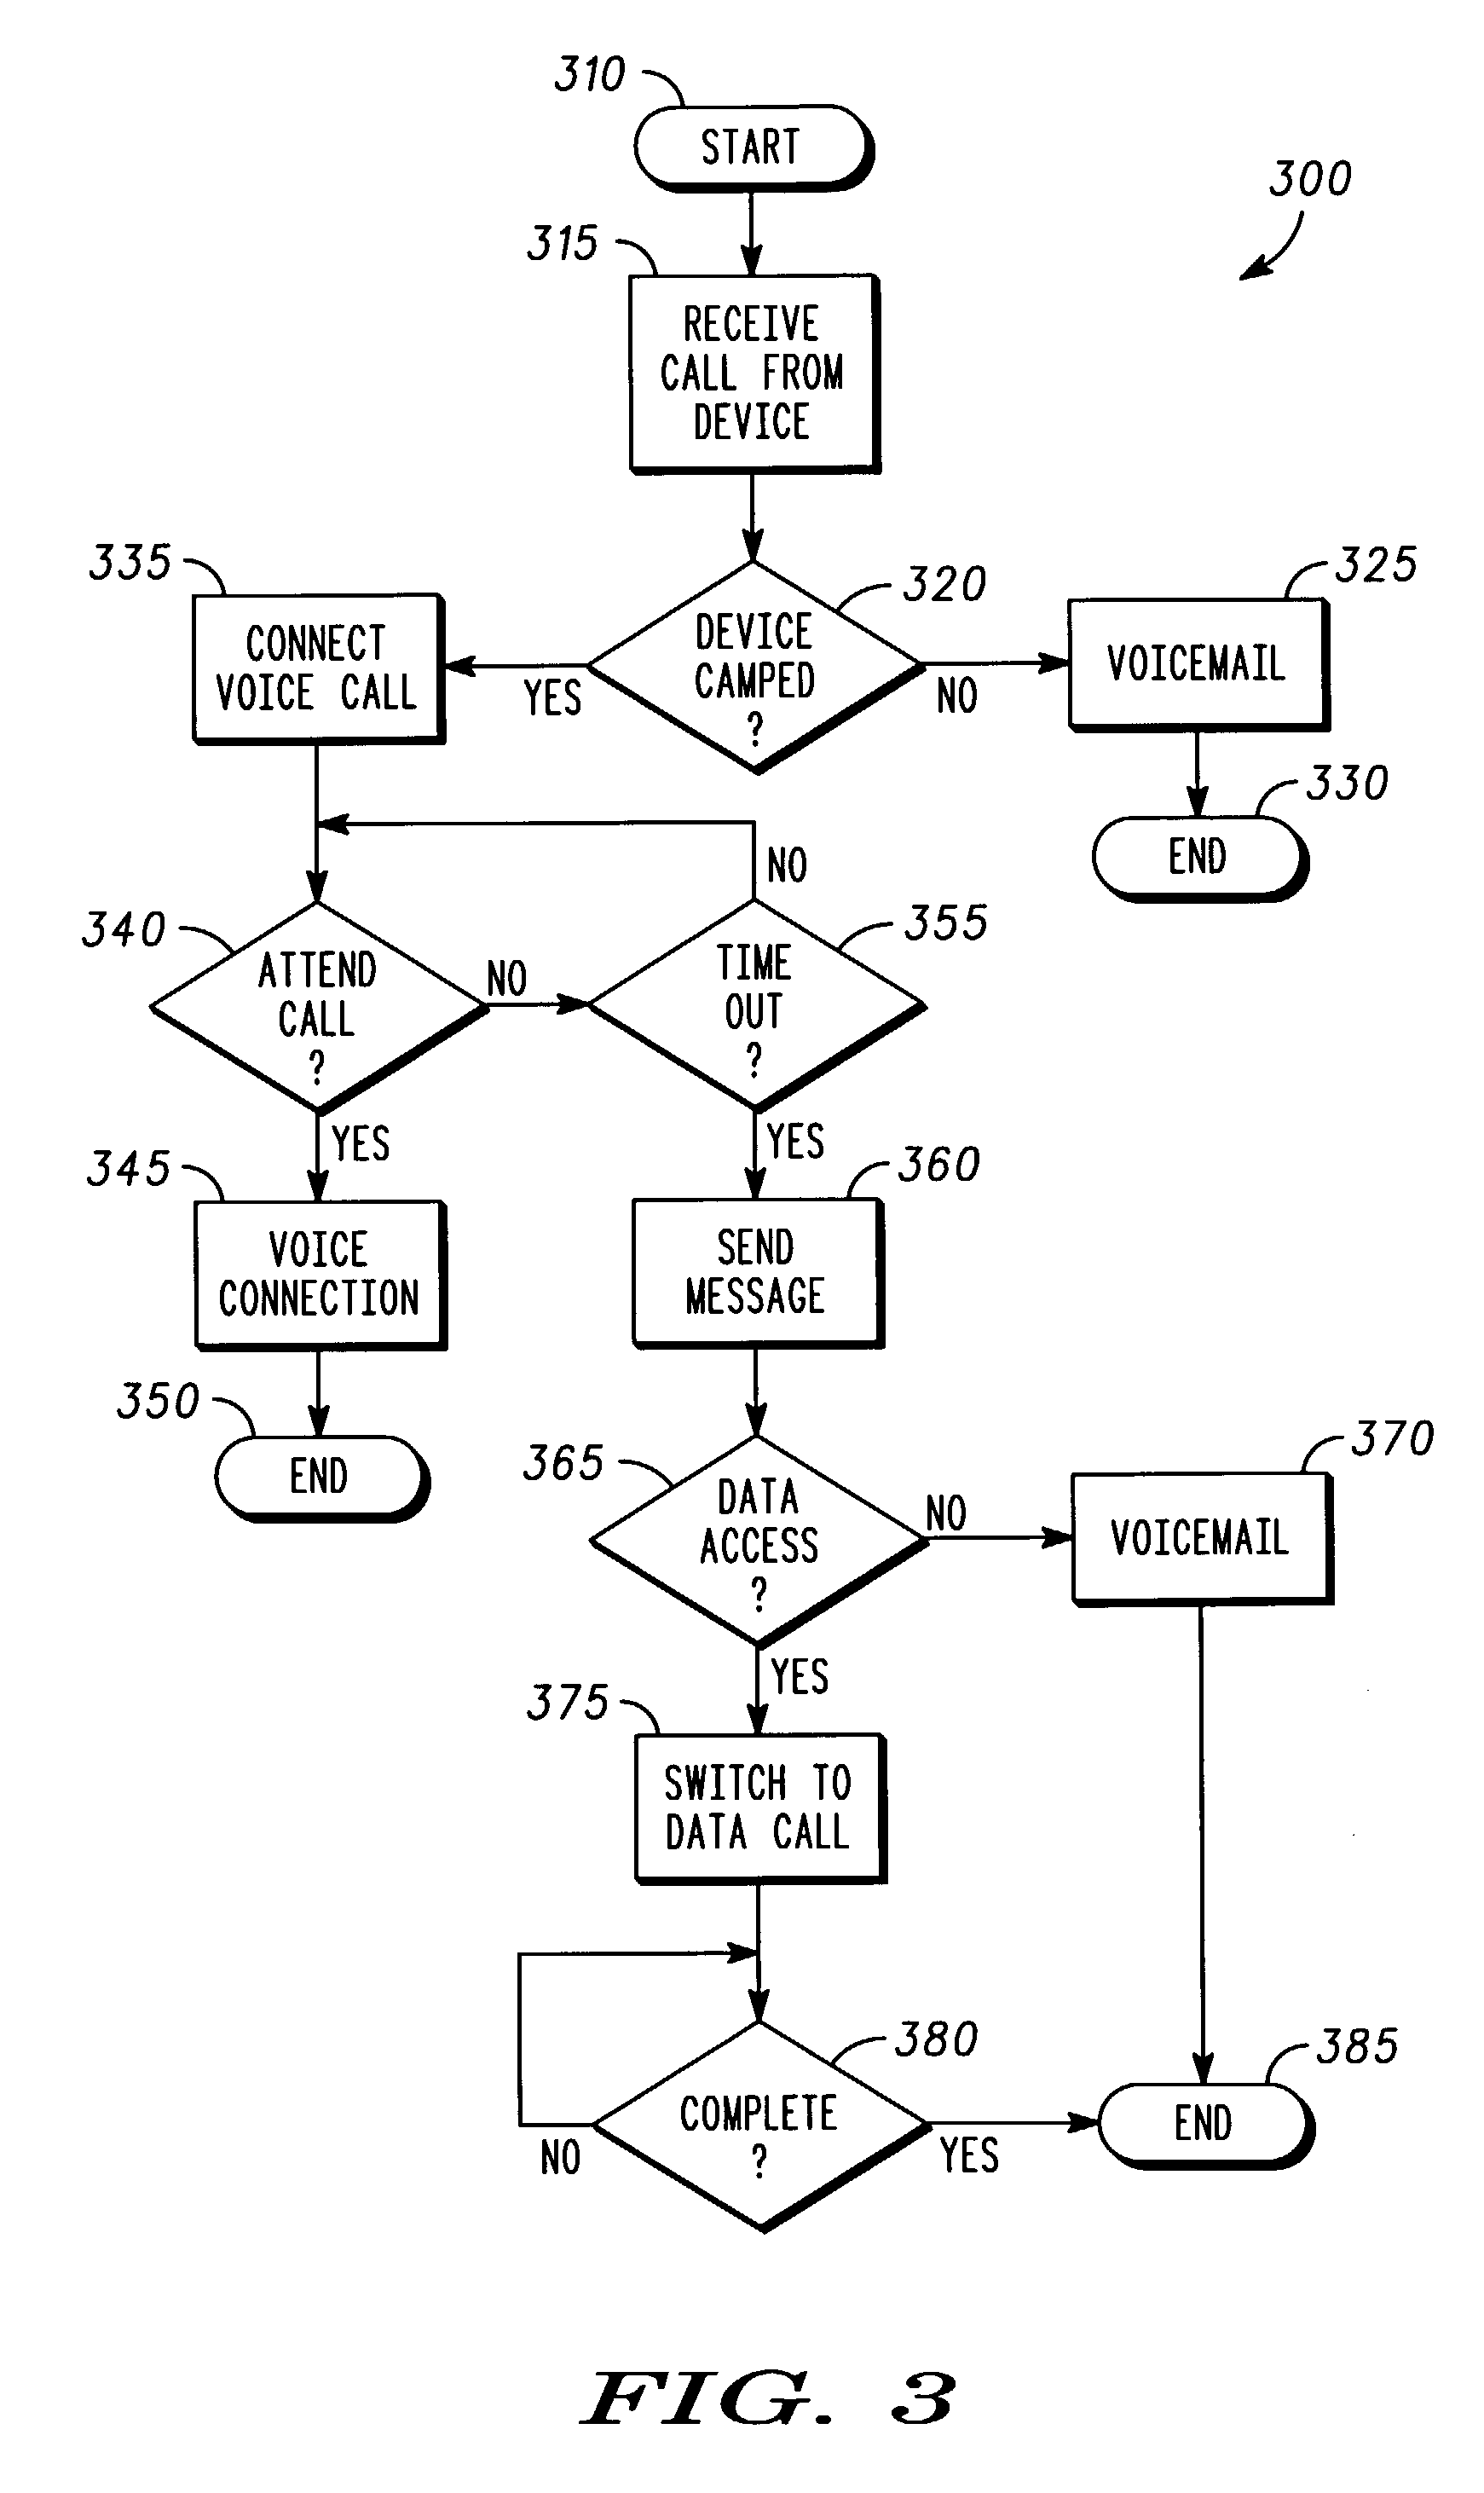 Method and apparatus for remote data access in a mobile communication device